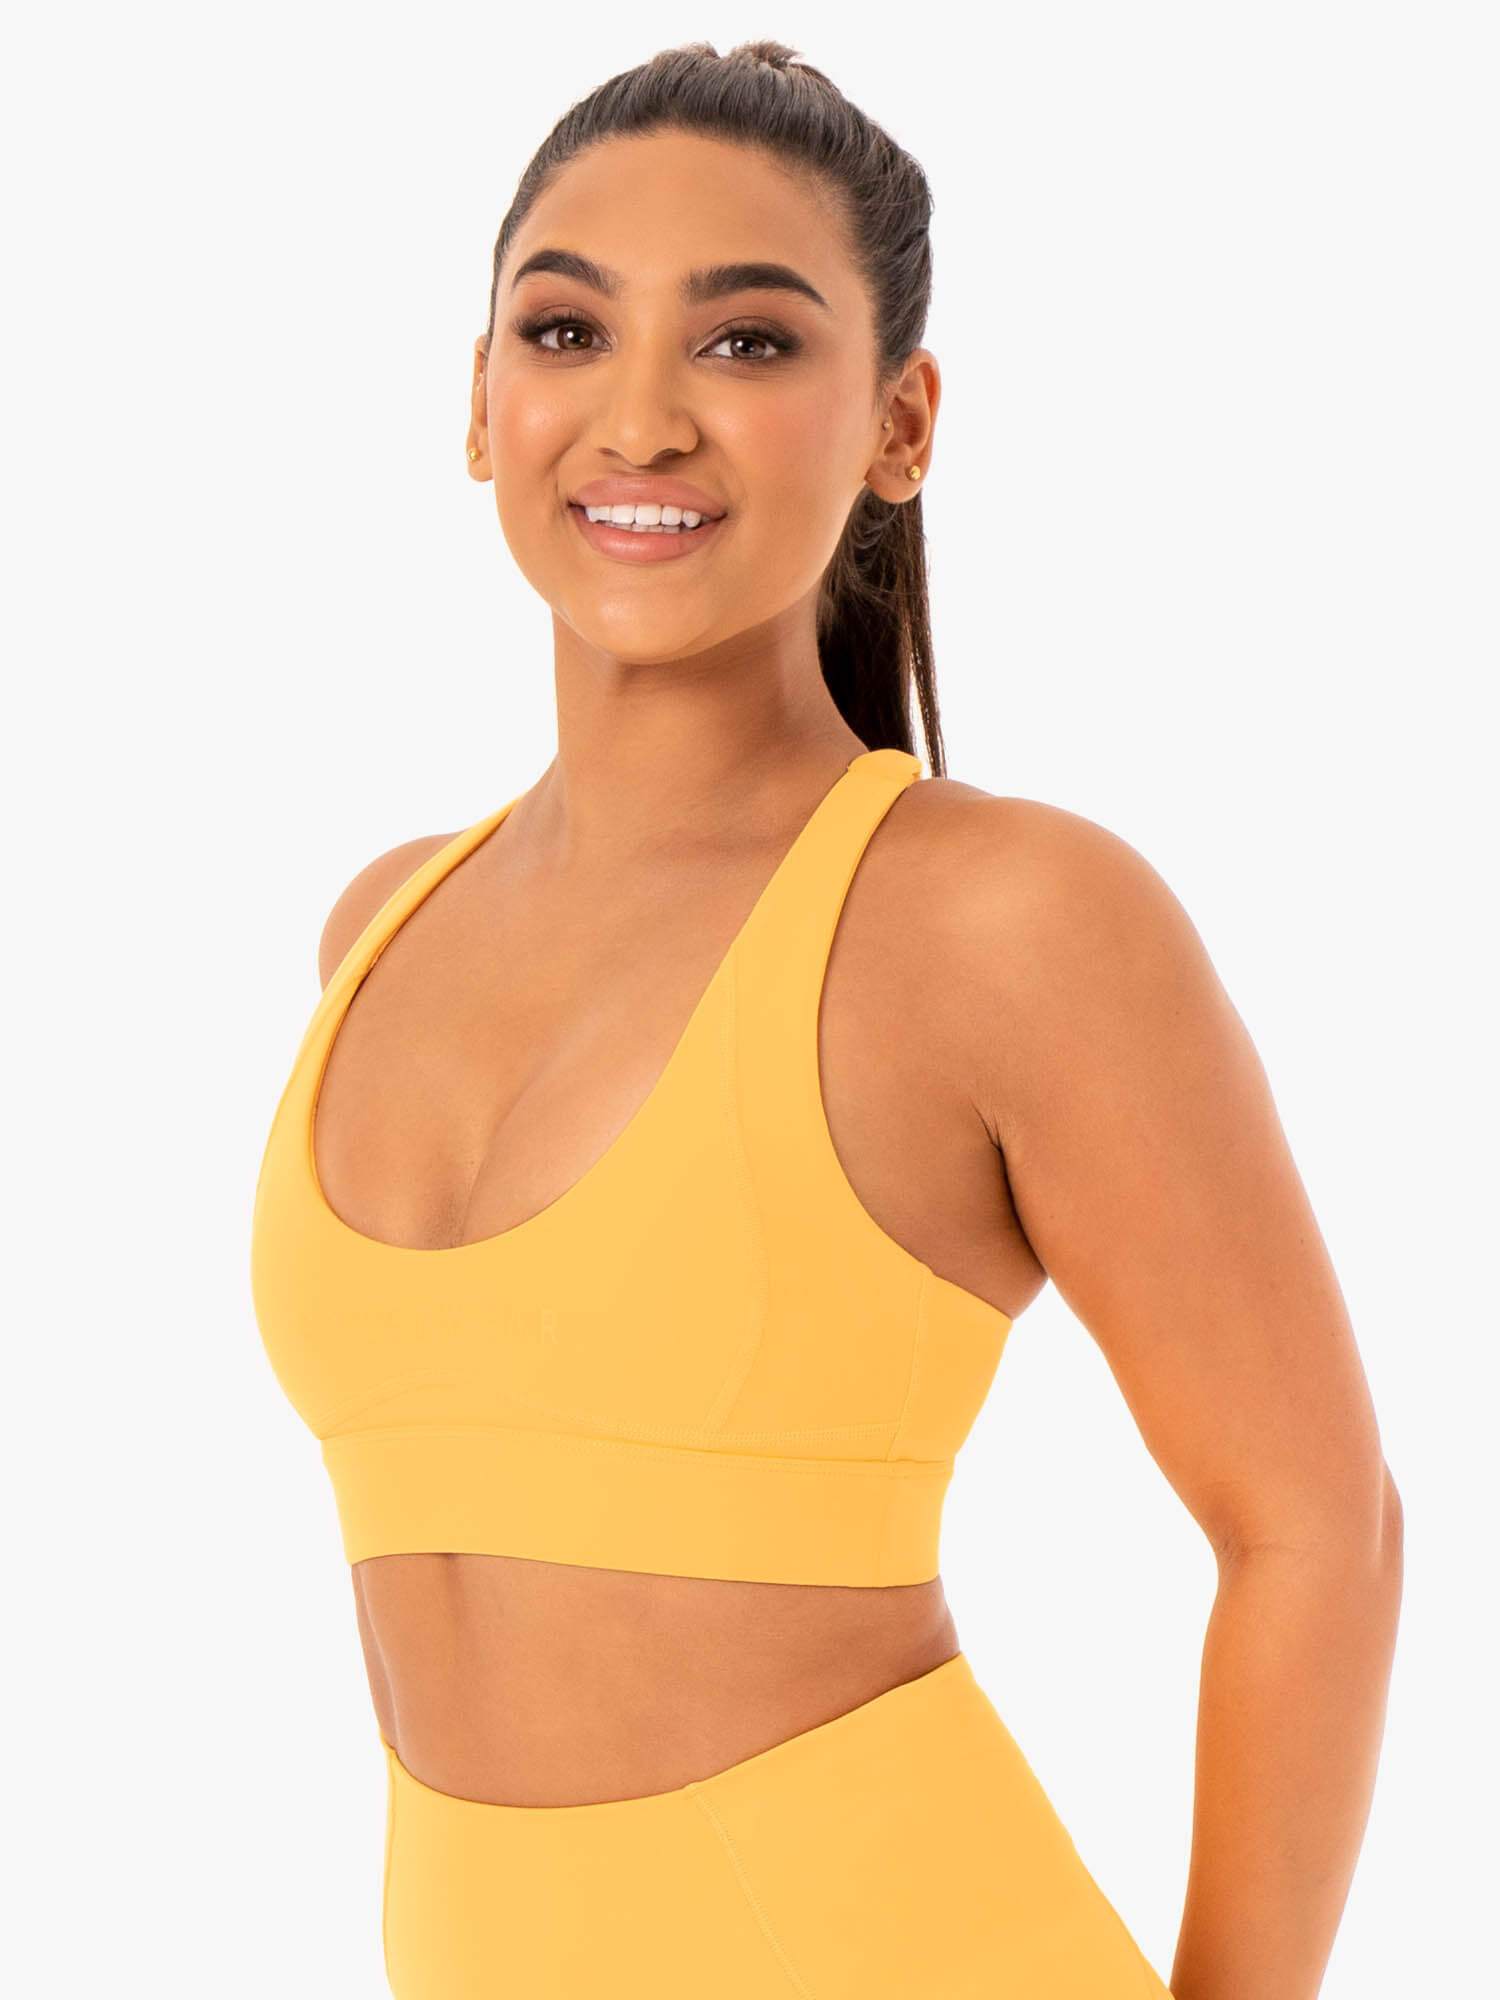 Why Does My Sports Bra Roll Up In The Front? – solowomen